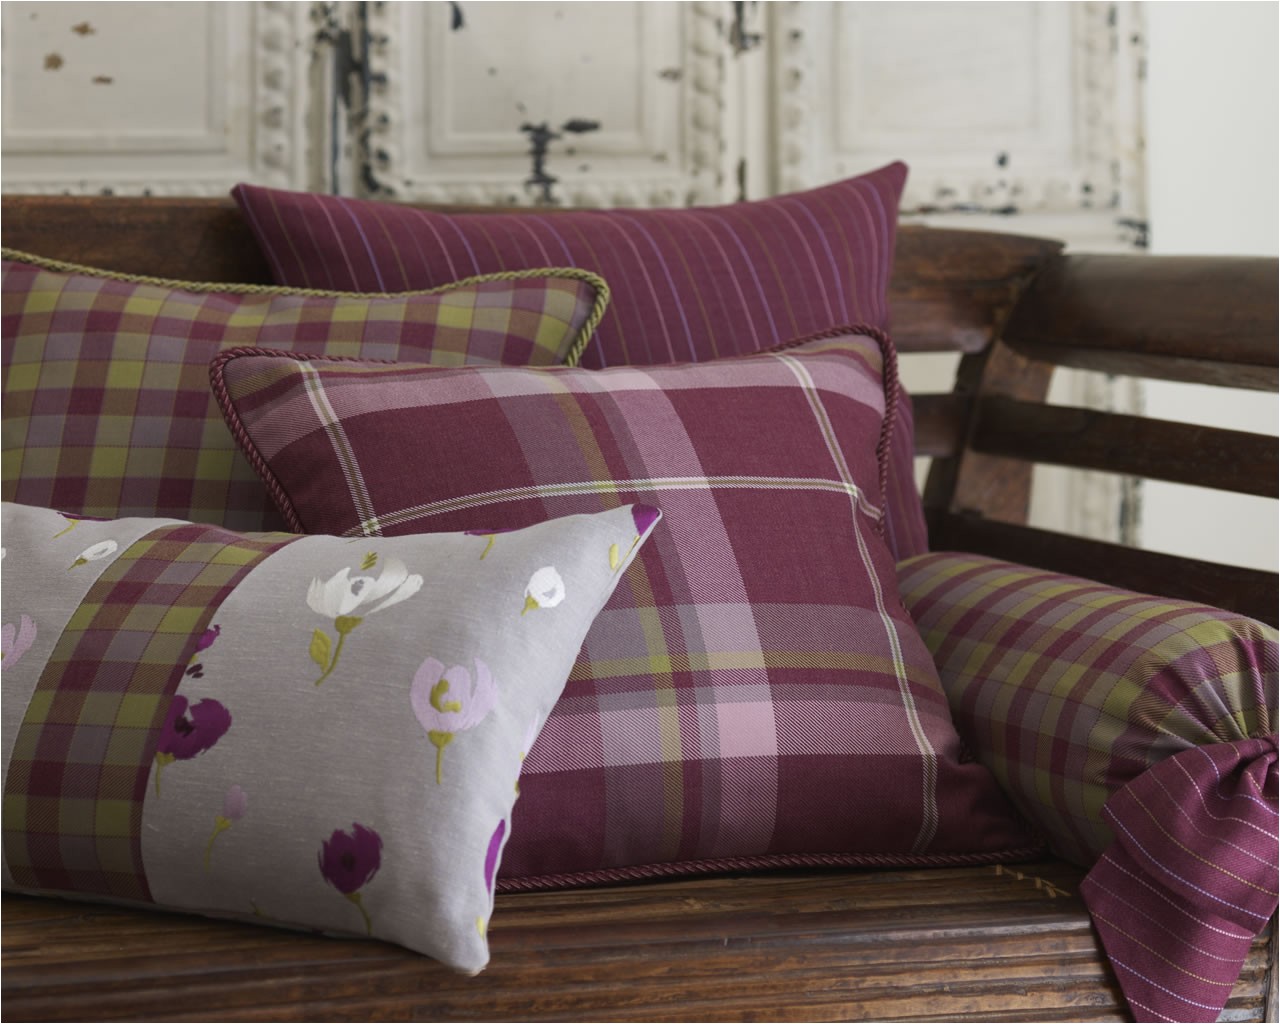 Marshalls Curtains and Bedding Marshalls Of Preston Quality Curtains and Bedding Direct